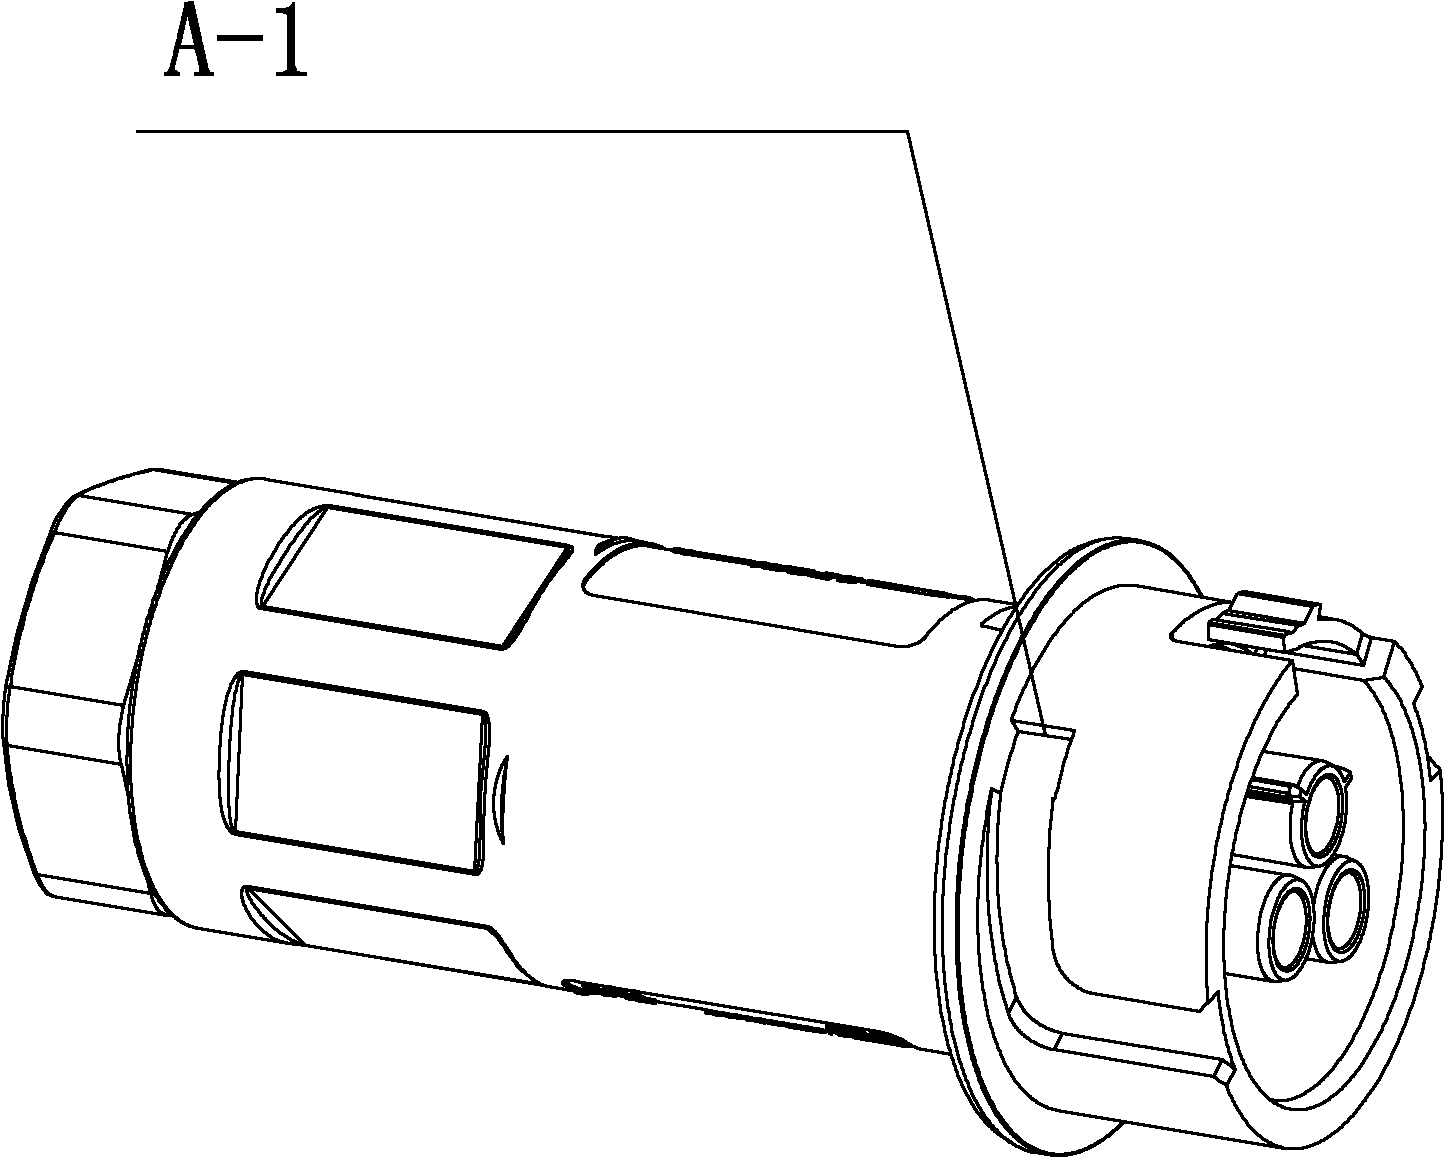 Connector female and male self-locking device